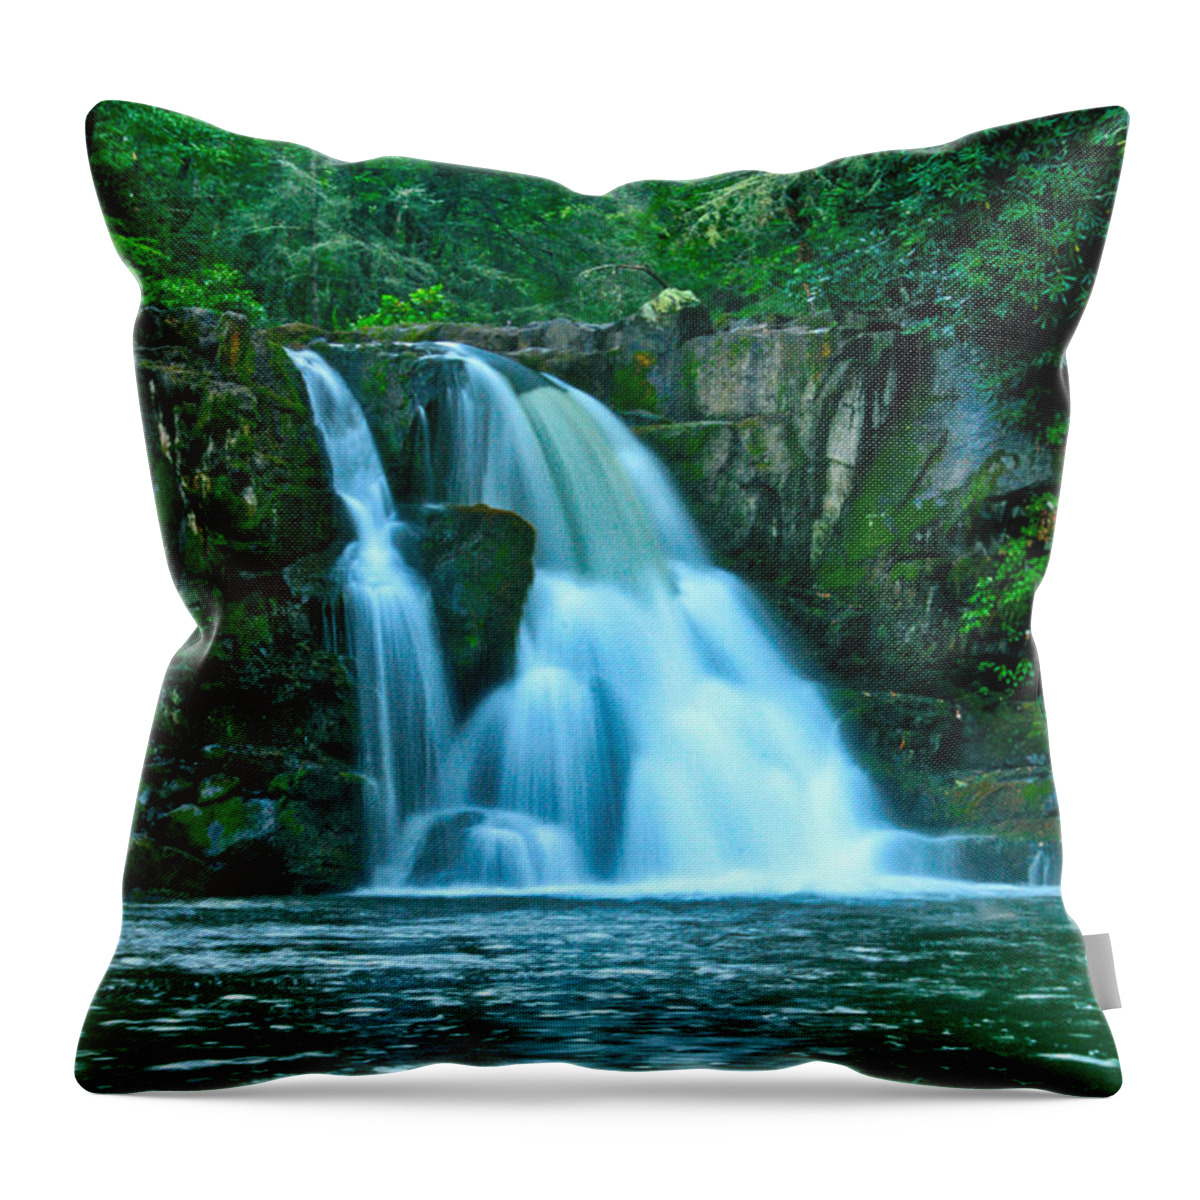 Art Prints Throw Pillow featuring the photograph Abrams Falls by Nunweiler Photography